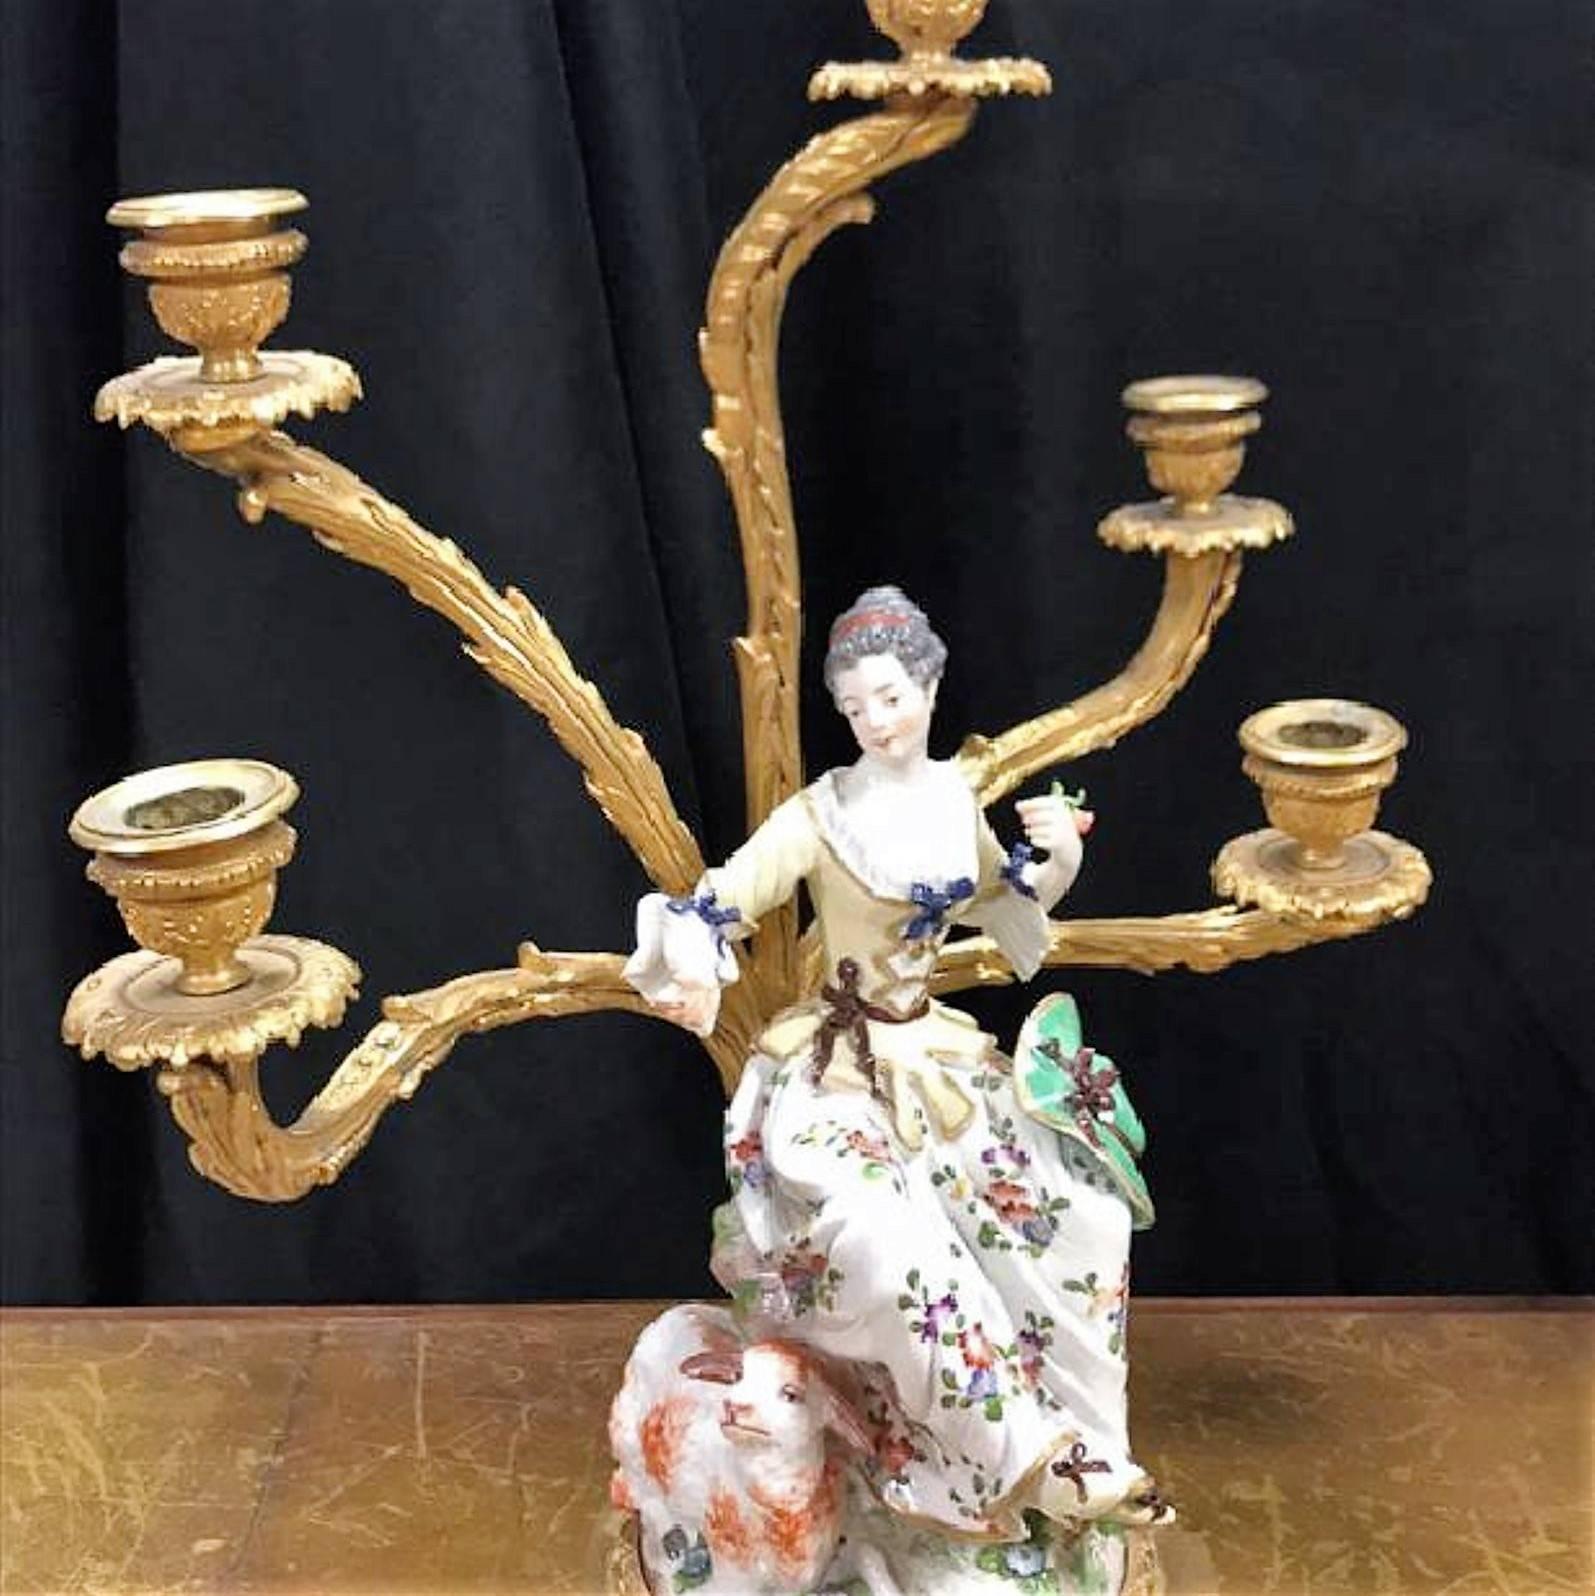 These are Magnificent!

Pair of early Meissen porcelain figurines fitted as bronze candelabra.

The highly detailed figures of paramours colorfully decorated and dressed in classic romantic garb are mounted upon gold washed bronze footed bases